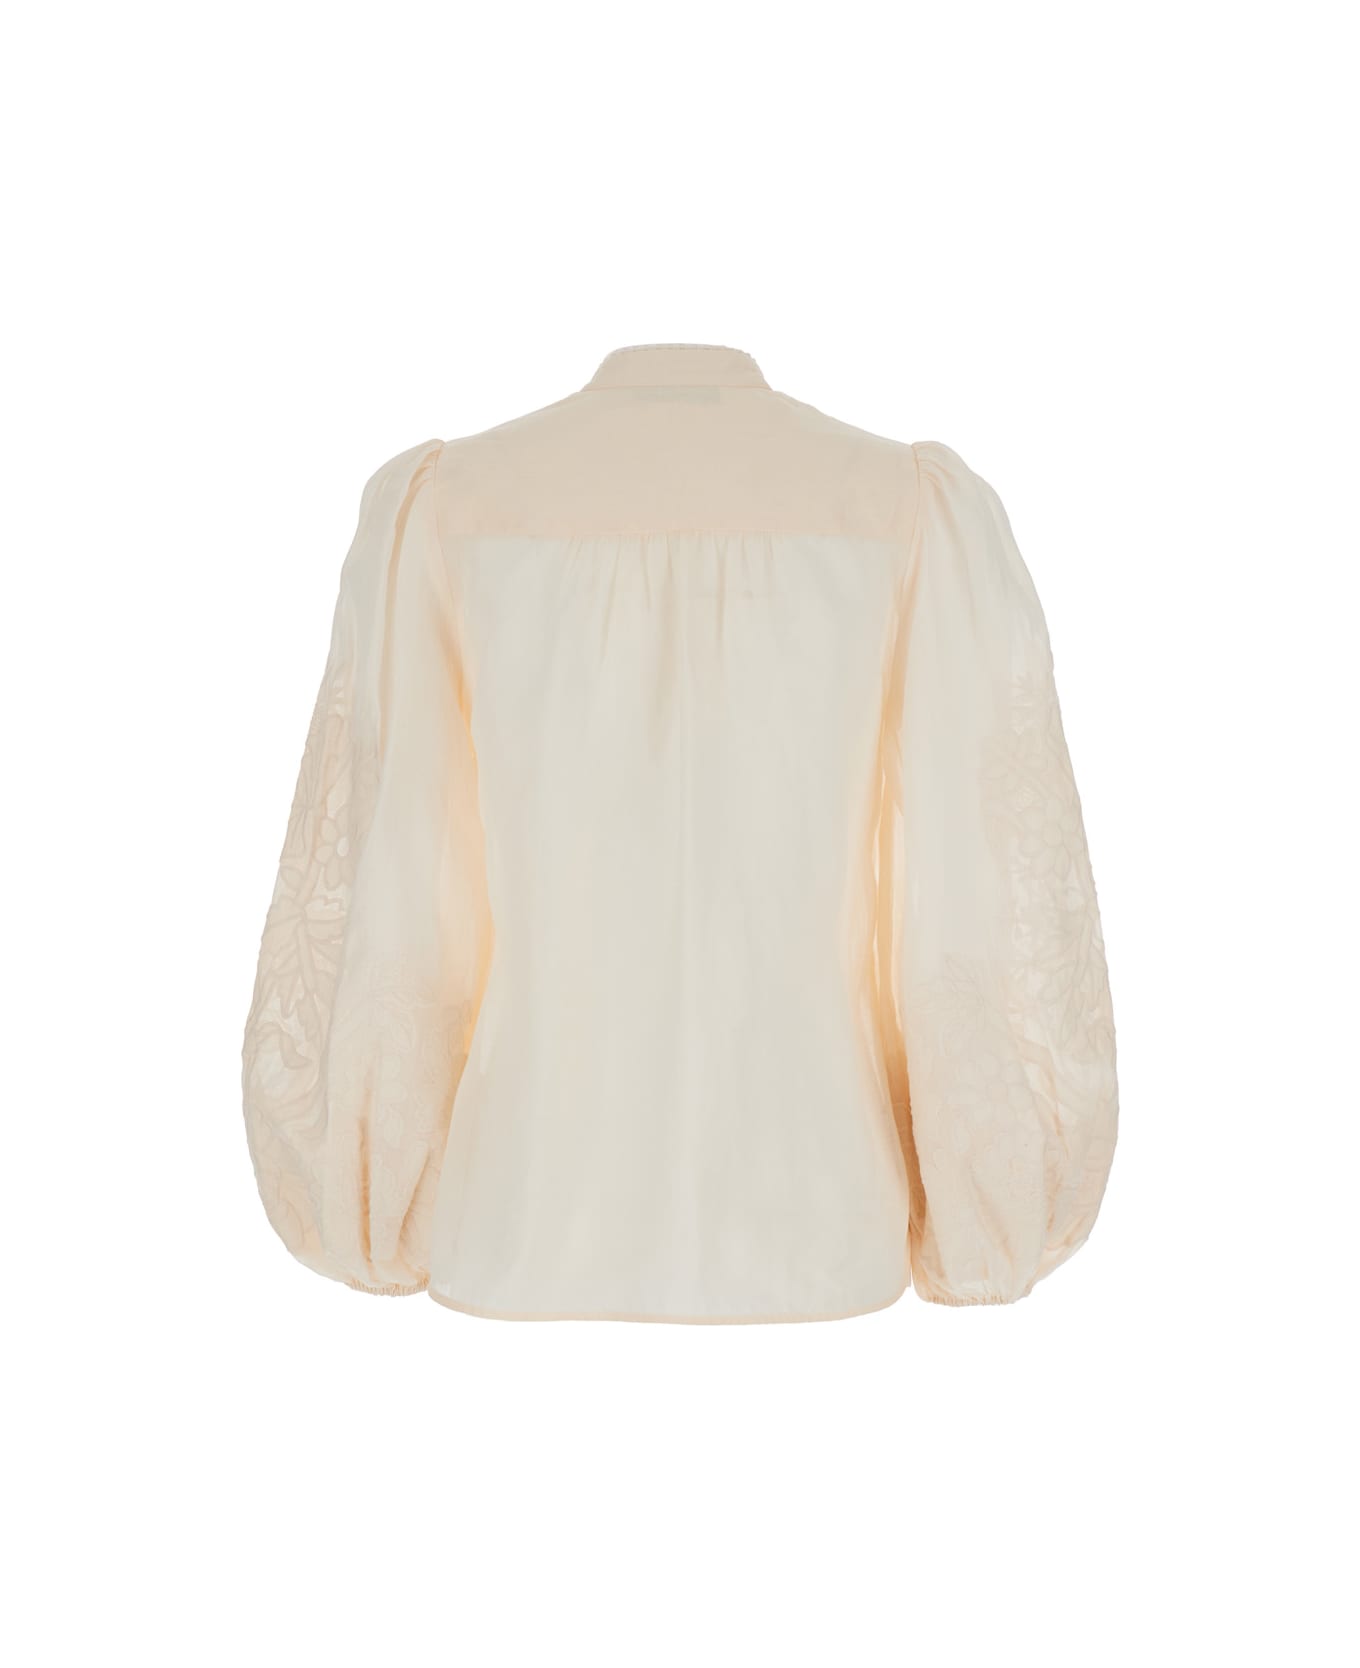 Zimmermann White Blouse With Embroidery And Puffed Sleeves In Linen Woman - Beige ブラウス